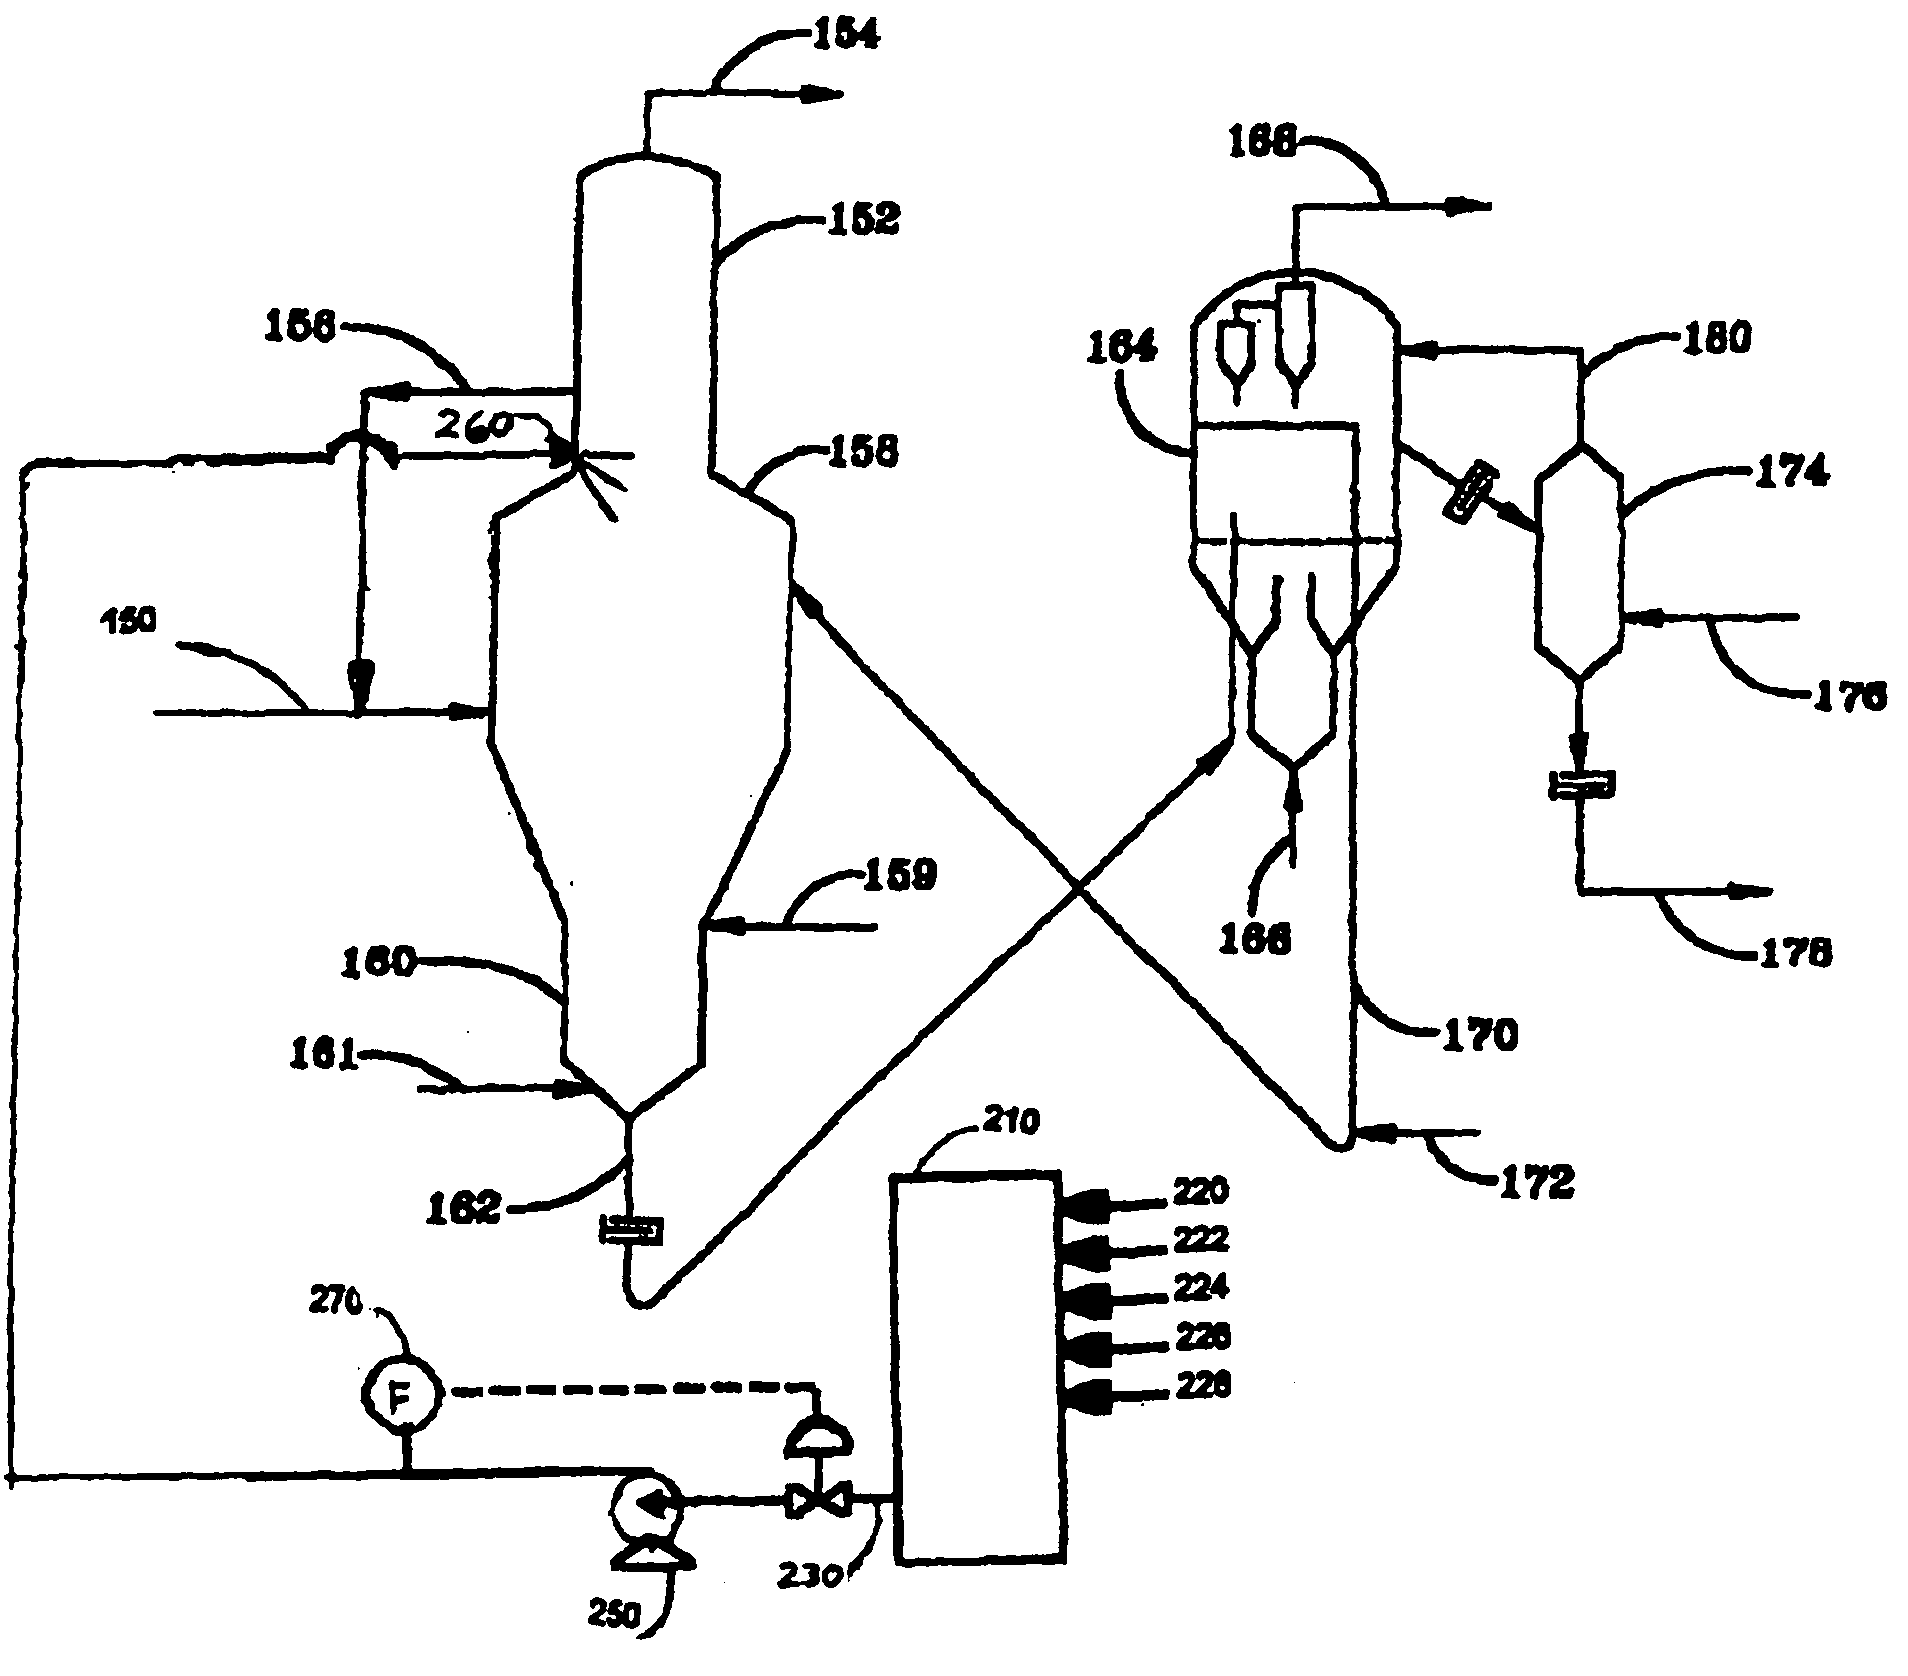 System and Method for Introducing an Additive into a Coking Process to Improve Quality and Yields of Coker Products